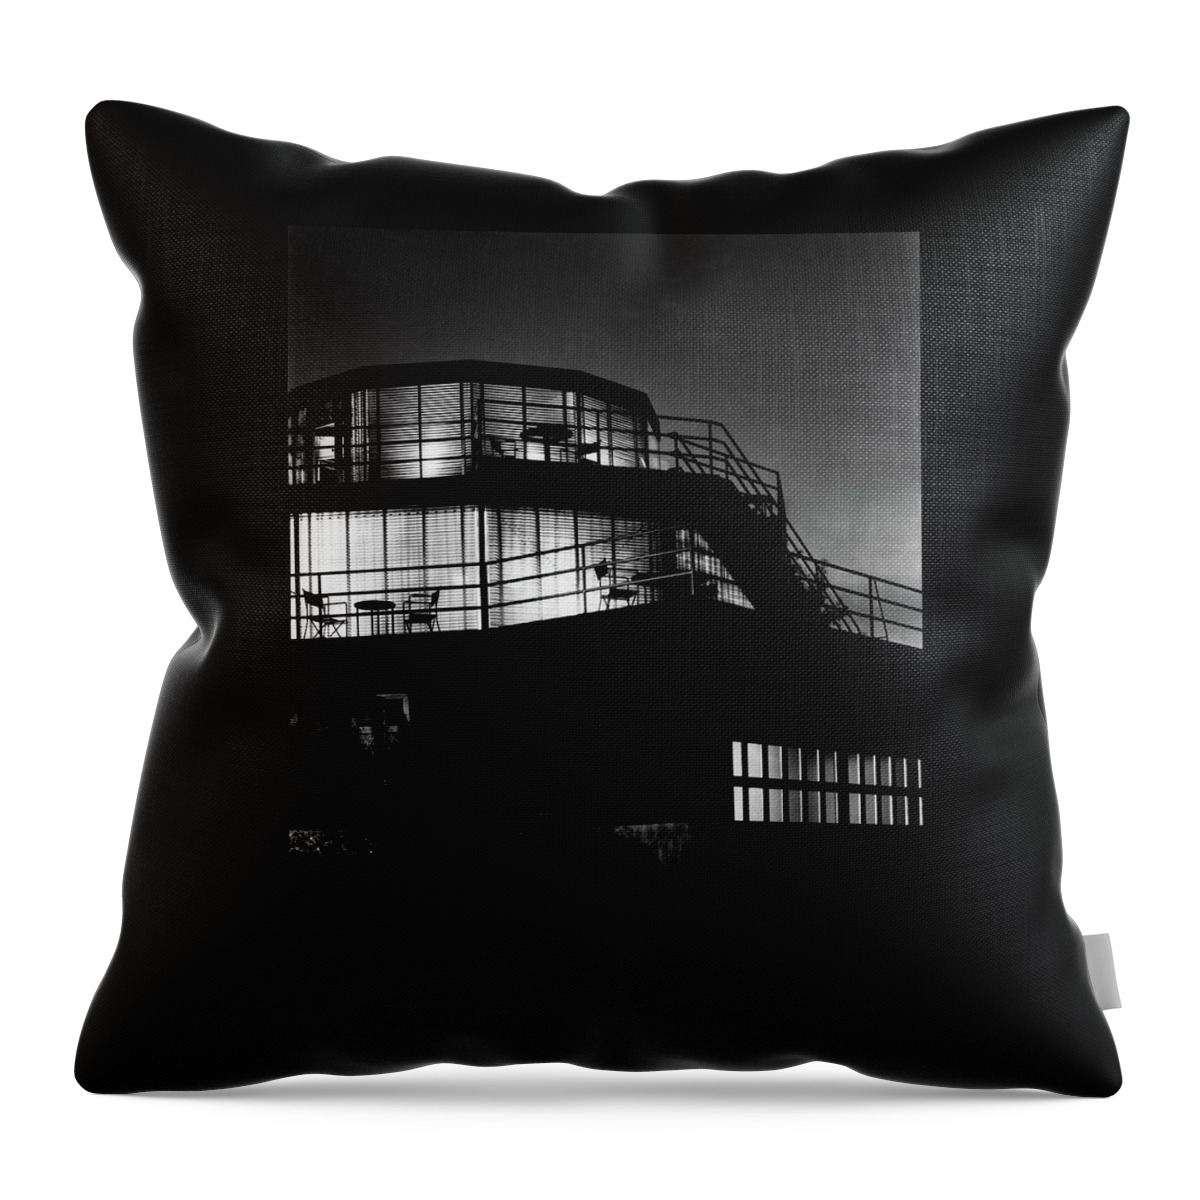 The Exterior Of A Spiral House Design At Night Throw Pillow